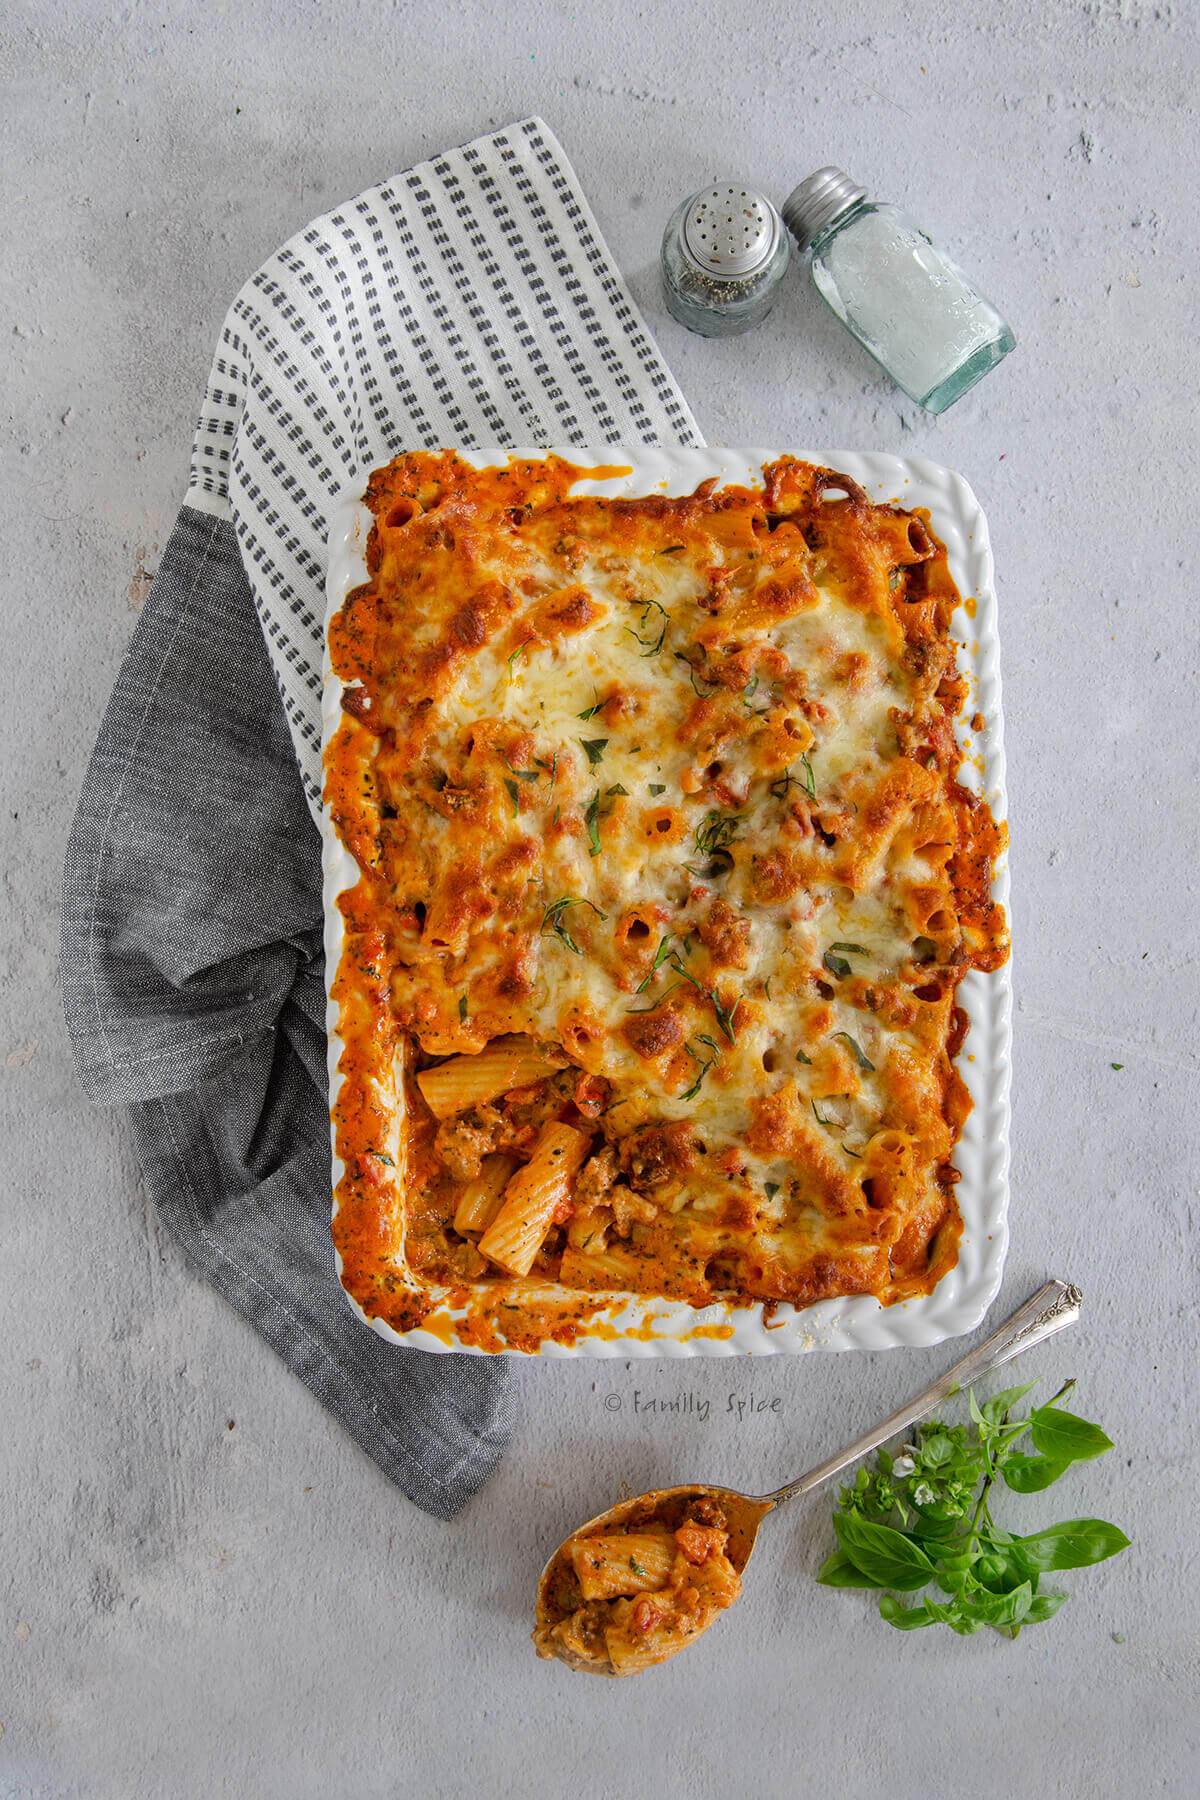 Top view of a casserole dish with bolognese pasta bake and a scoop taken out